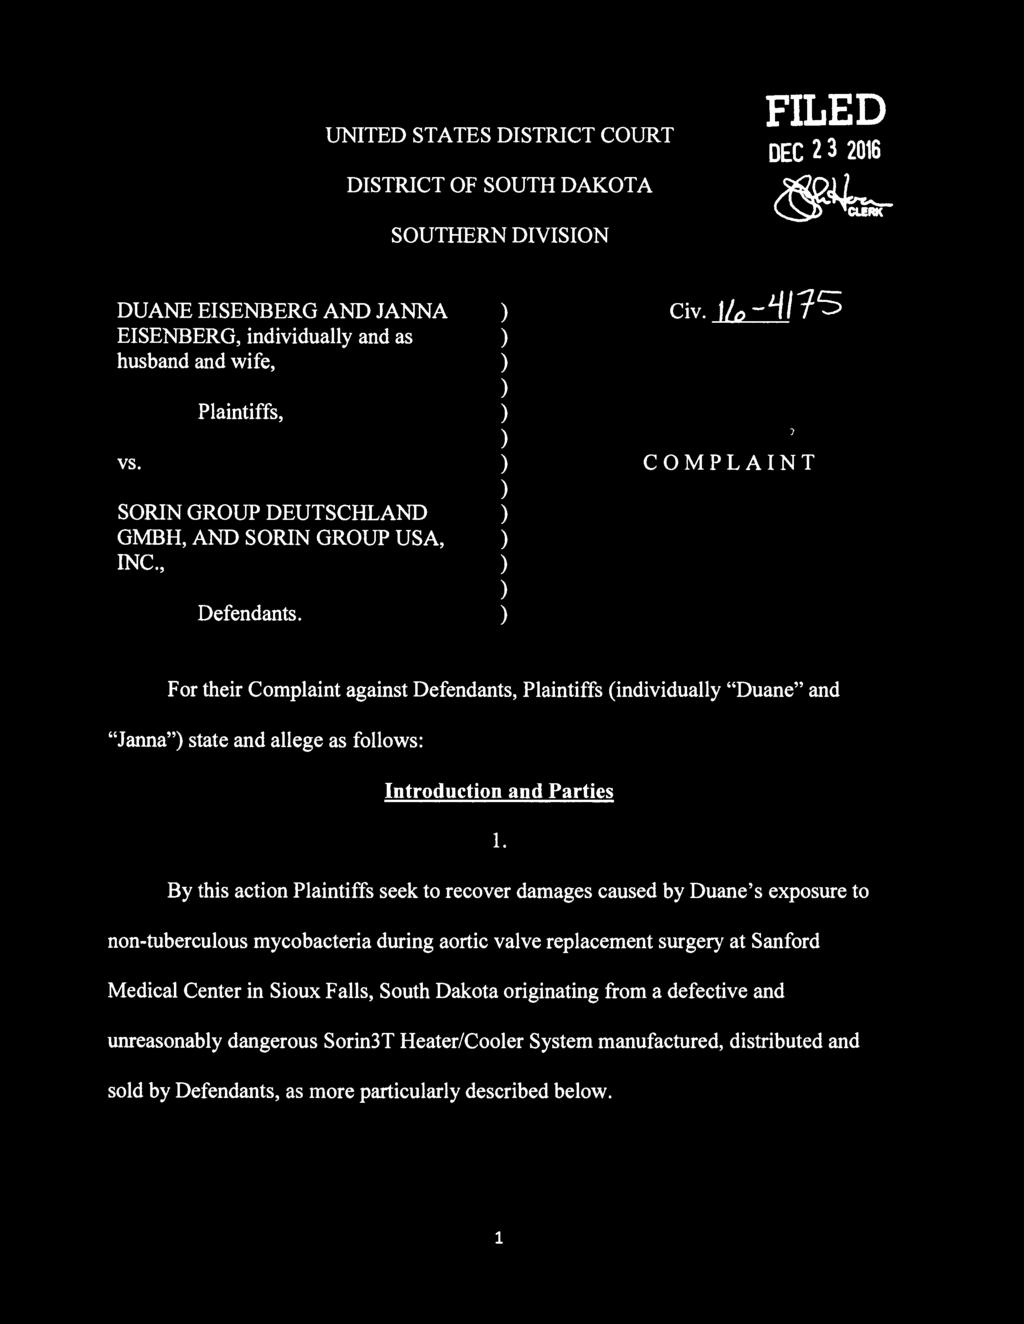 Uo -L//tS COMPLAINT For their Complaint against Defendants, Plaintiffs (individually "Duane" and "Janna" state and allege as follows: Introduction and Parties 1.